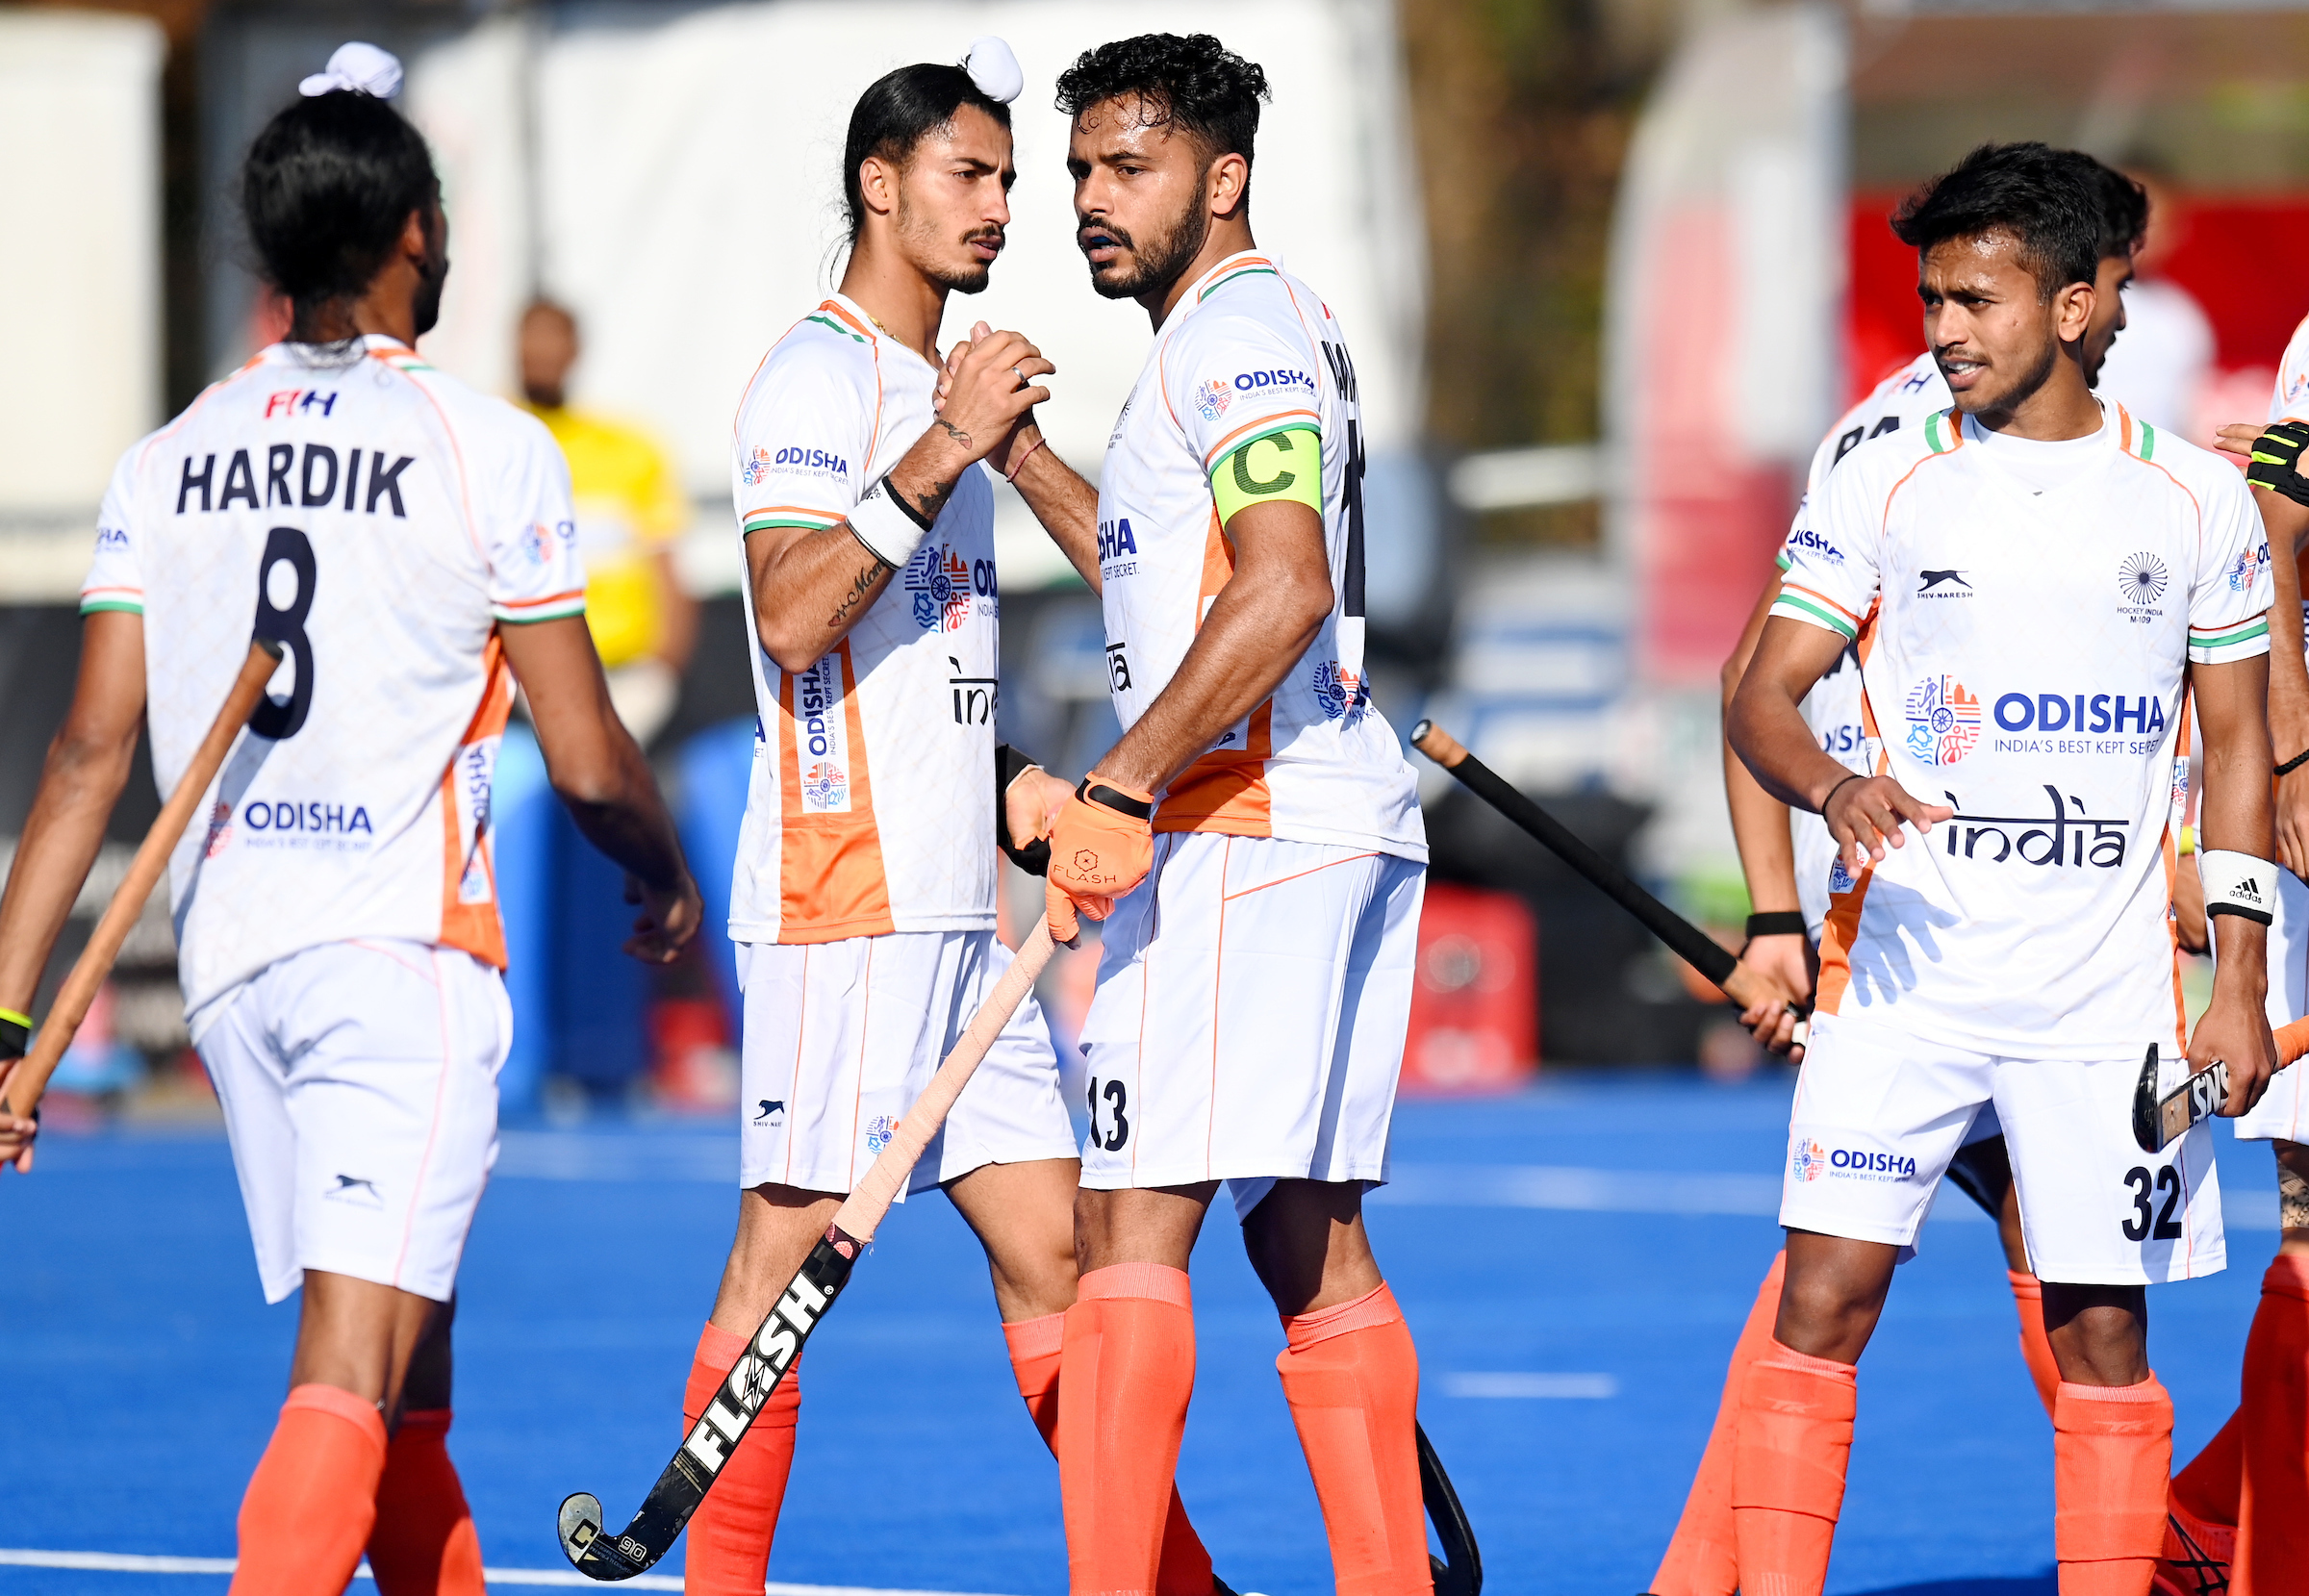 2021 Tokyo Olympics | Mental state of the Indian men's hockey team will be decisive, asserts Roelant Oltmans